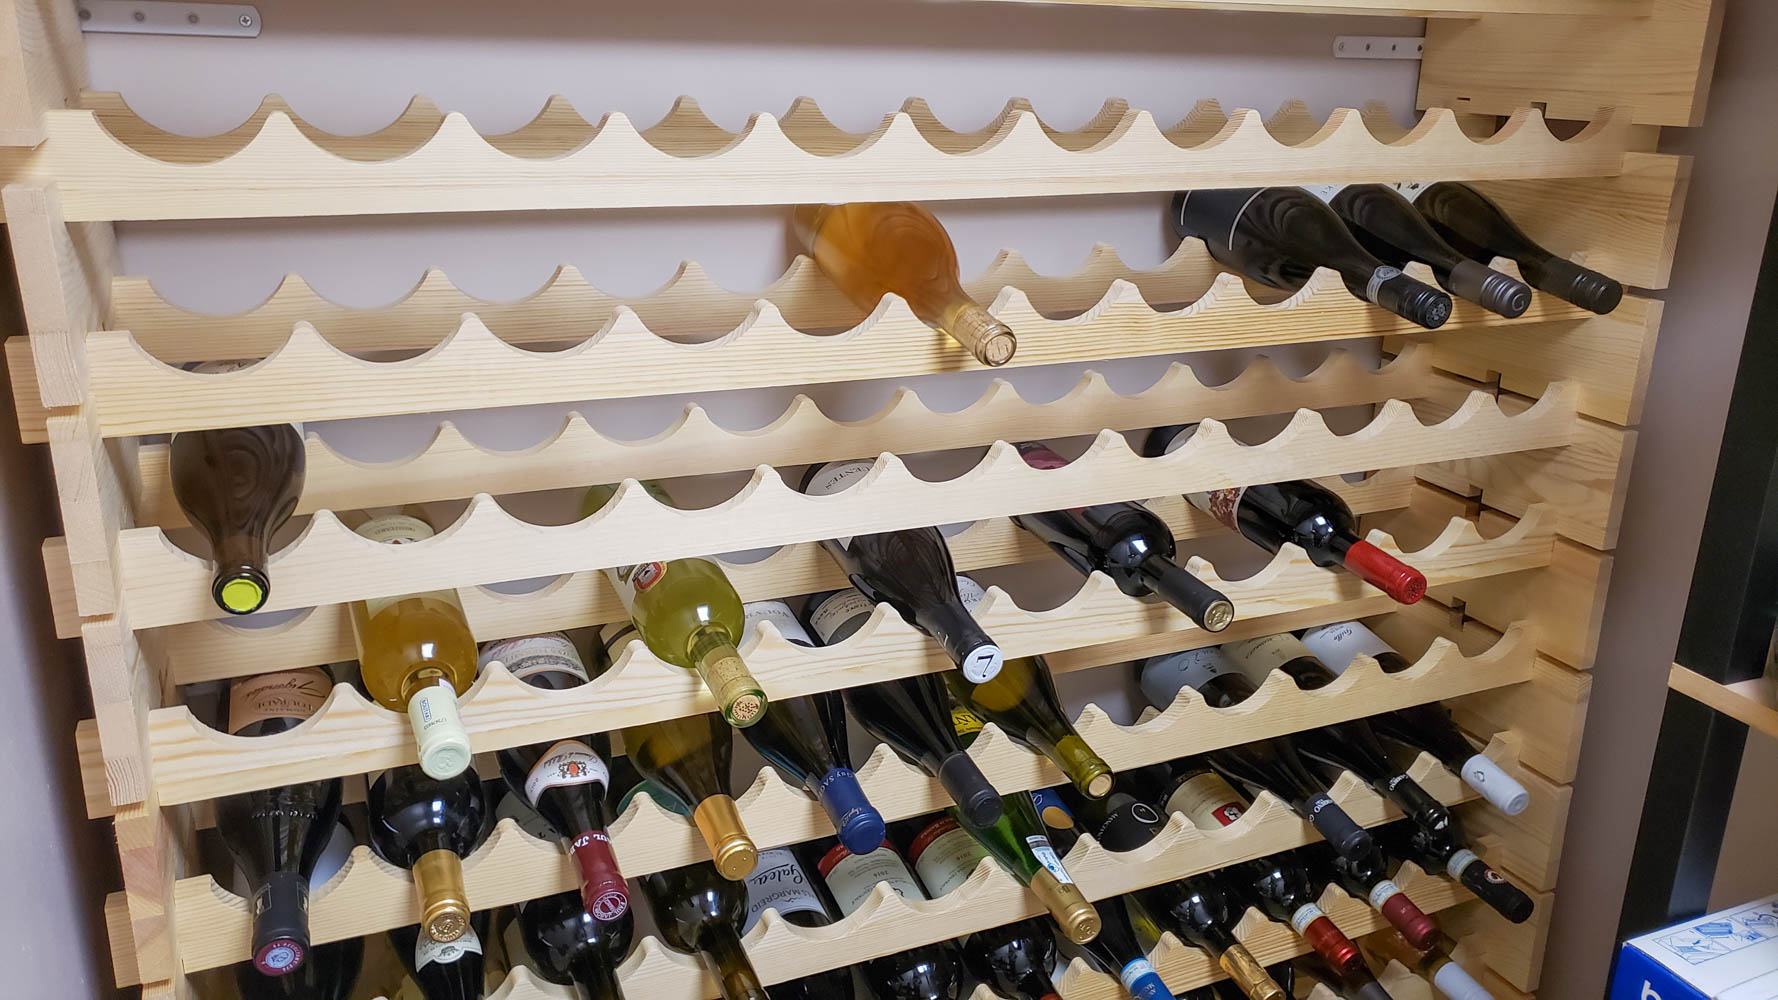 Build a Wine Cellar Stocked With Wine